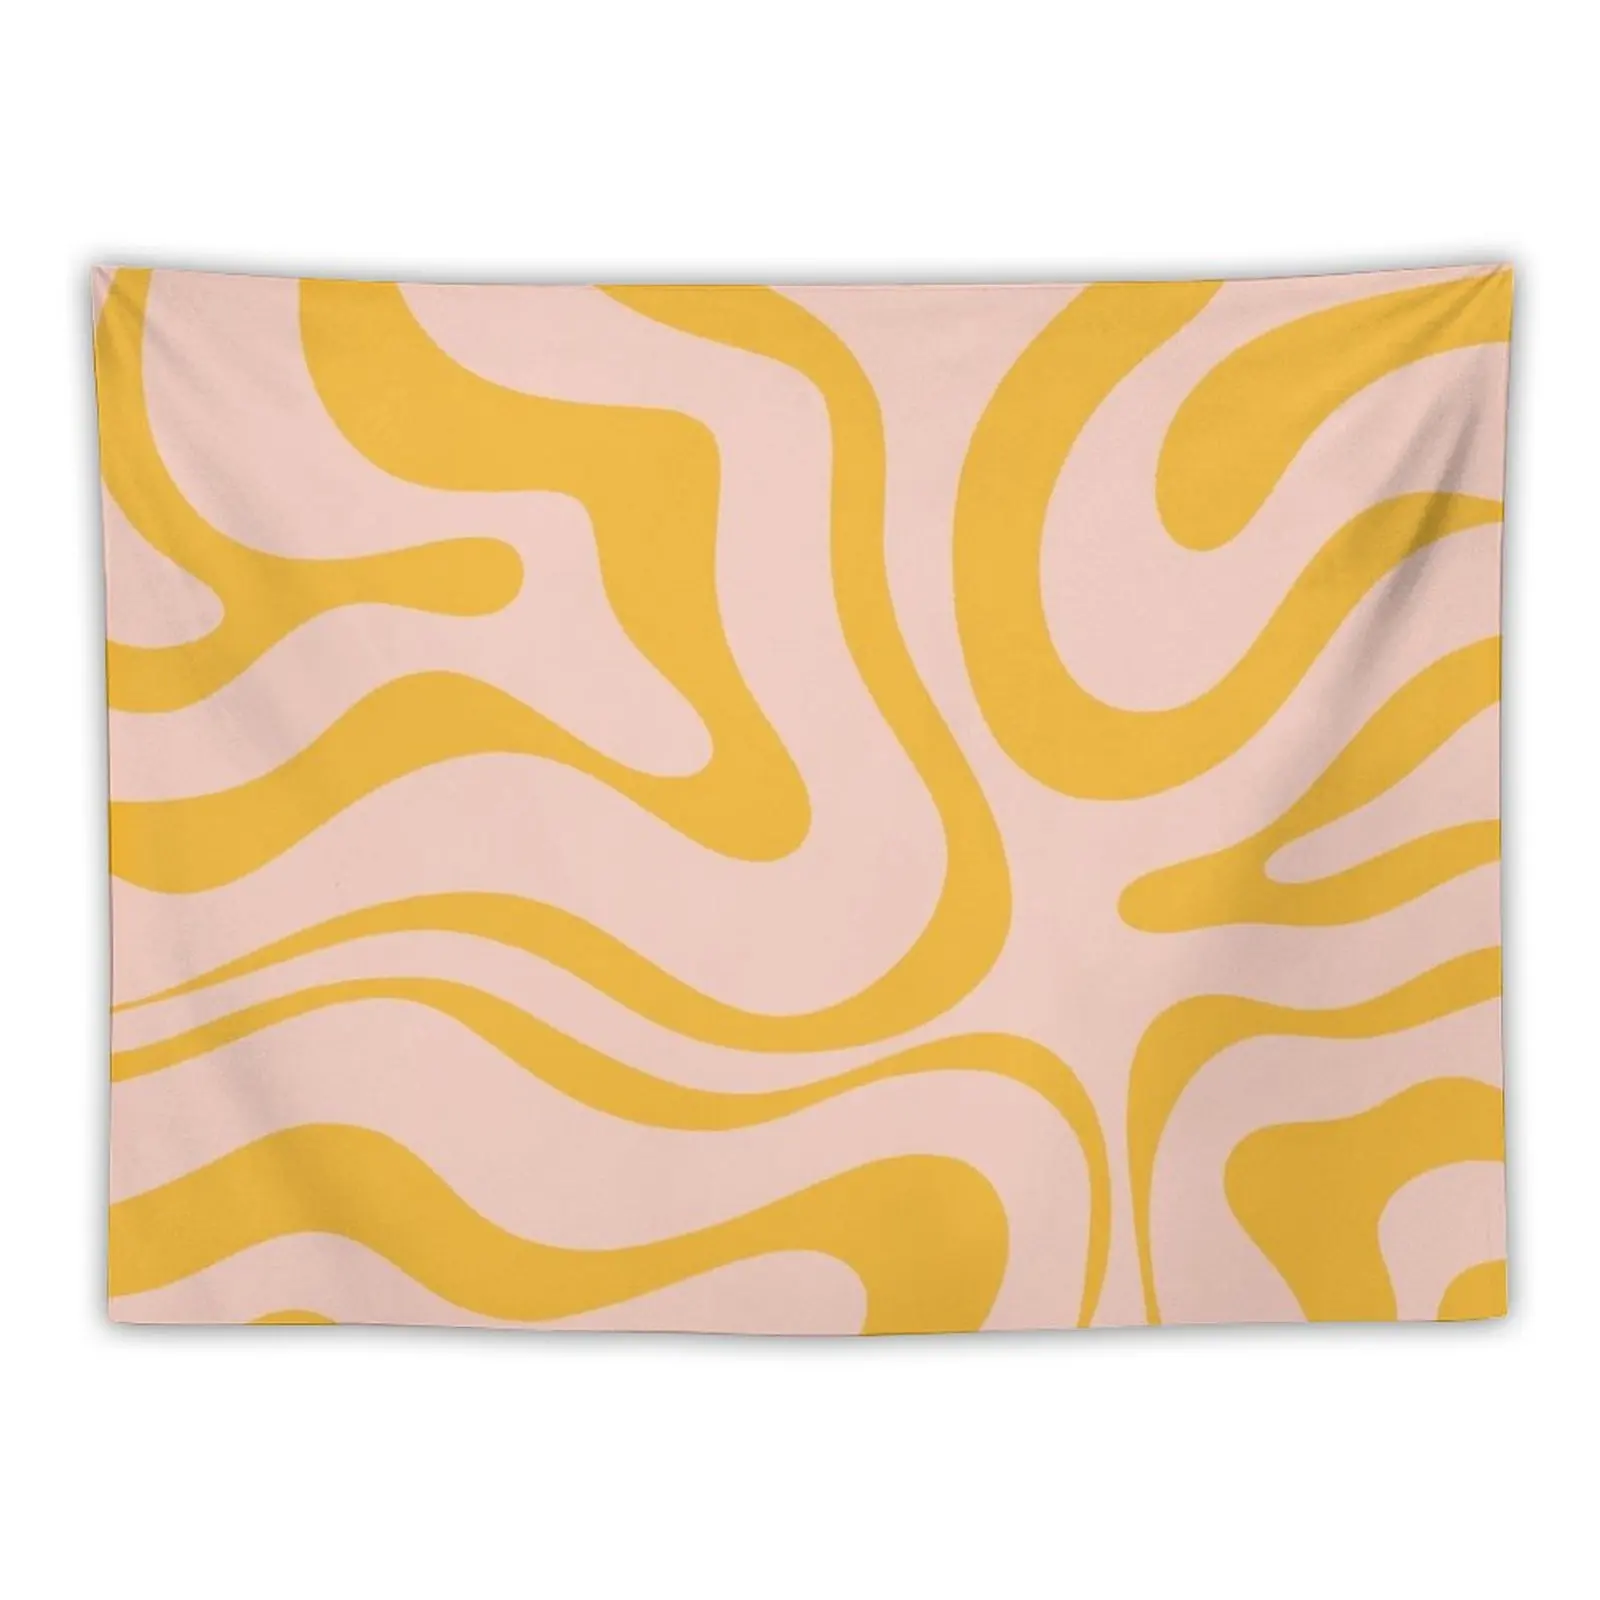 

Liquid Swirl Modern Abstract Pattern in Pale Blush Pink and Mustard Orange Tapestry Kawaii Room Decor Aesthetic Room Decors